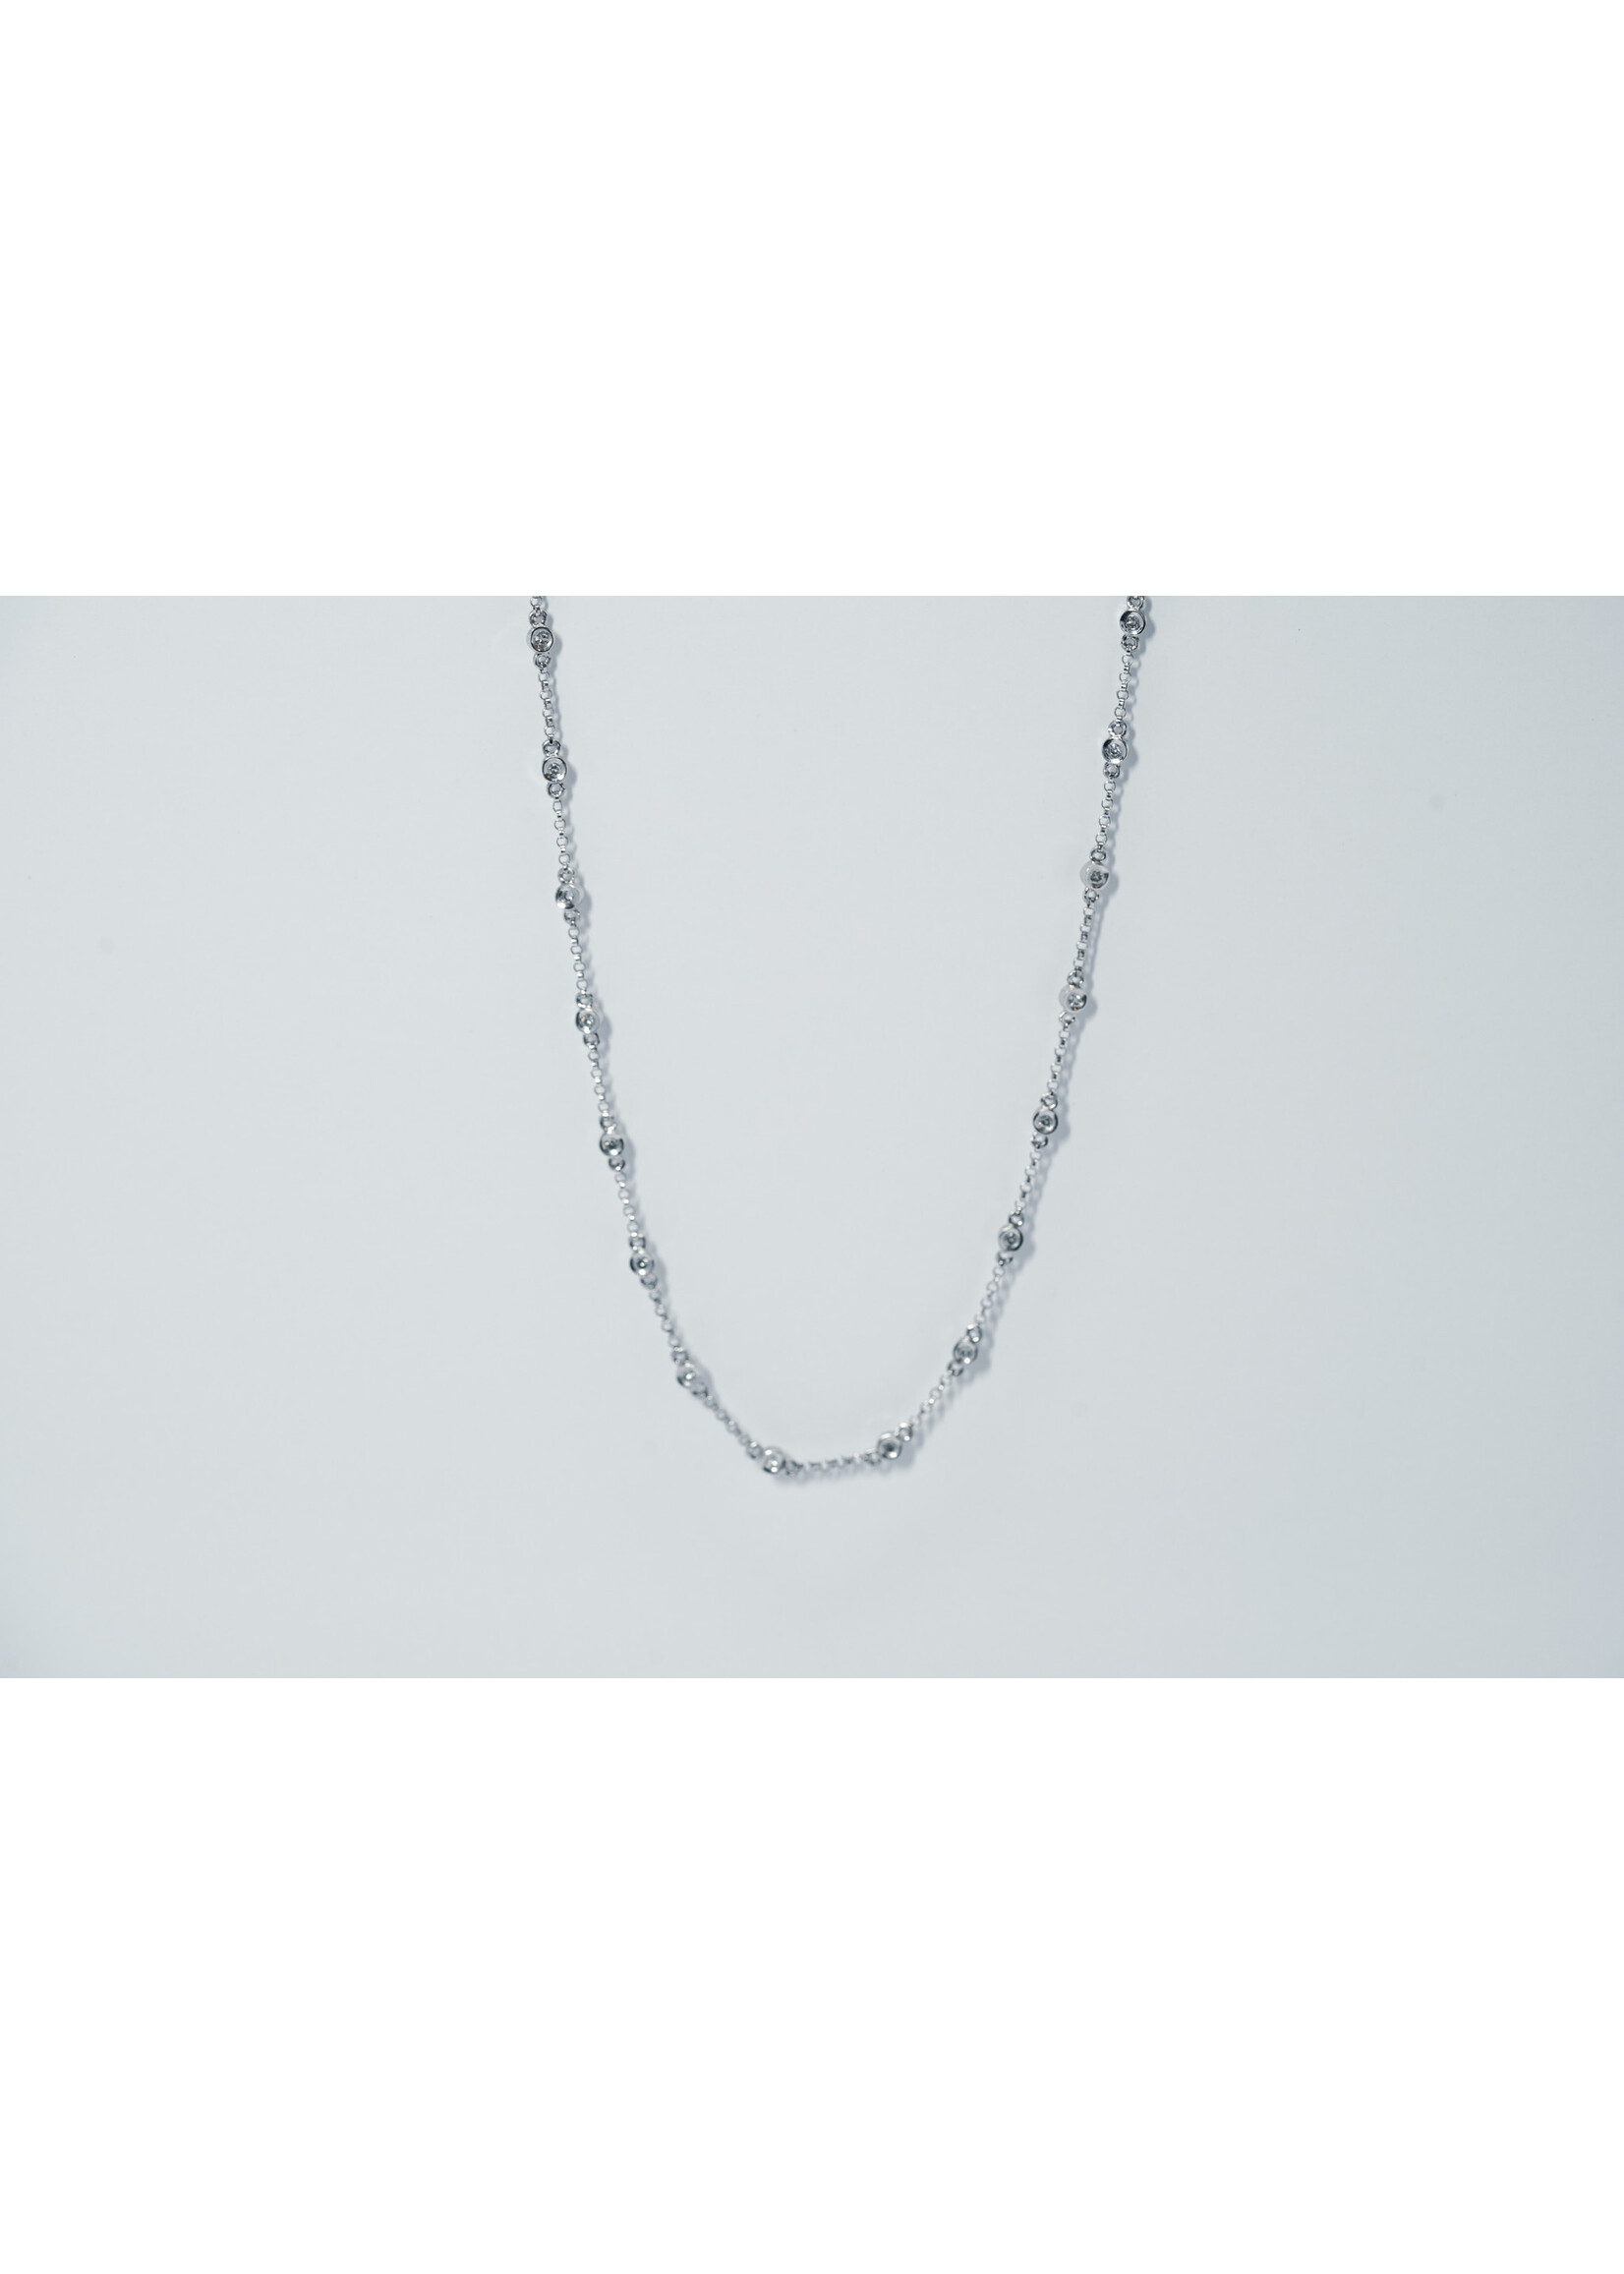 14KW 5.6g .38ctw Diamond By The Yard Necklace 18"